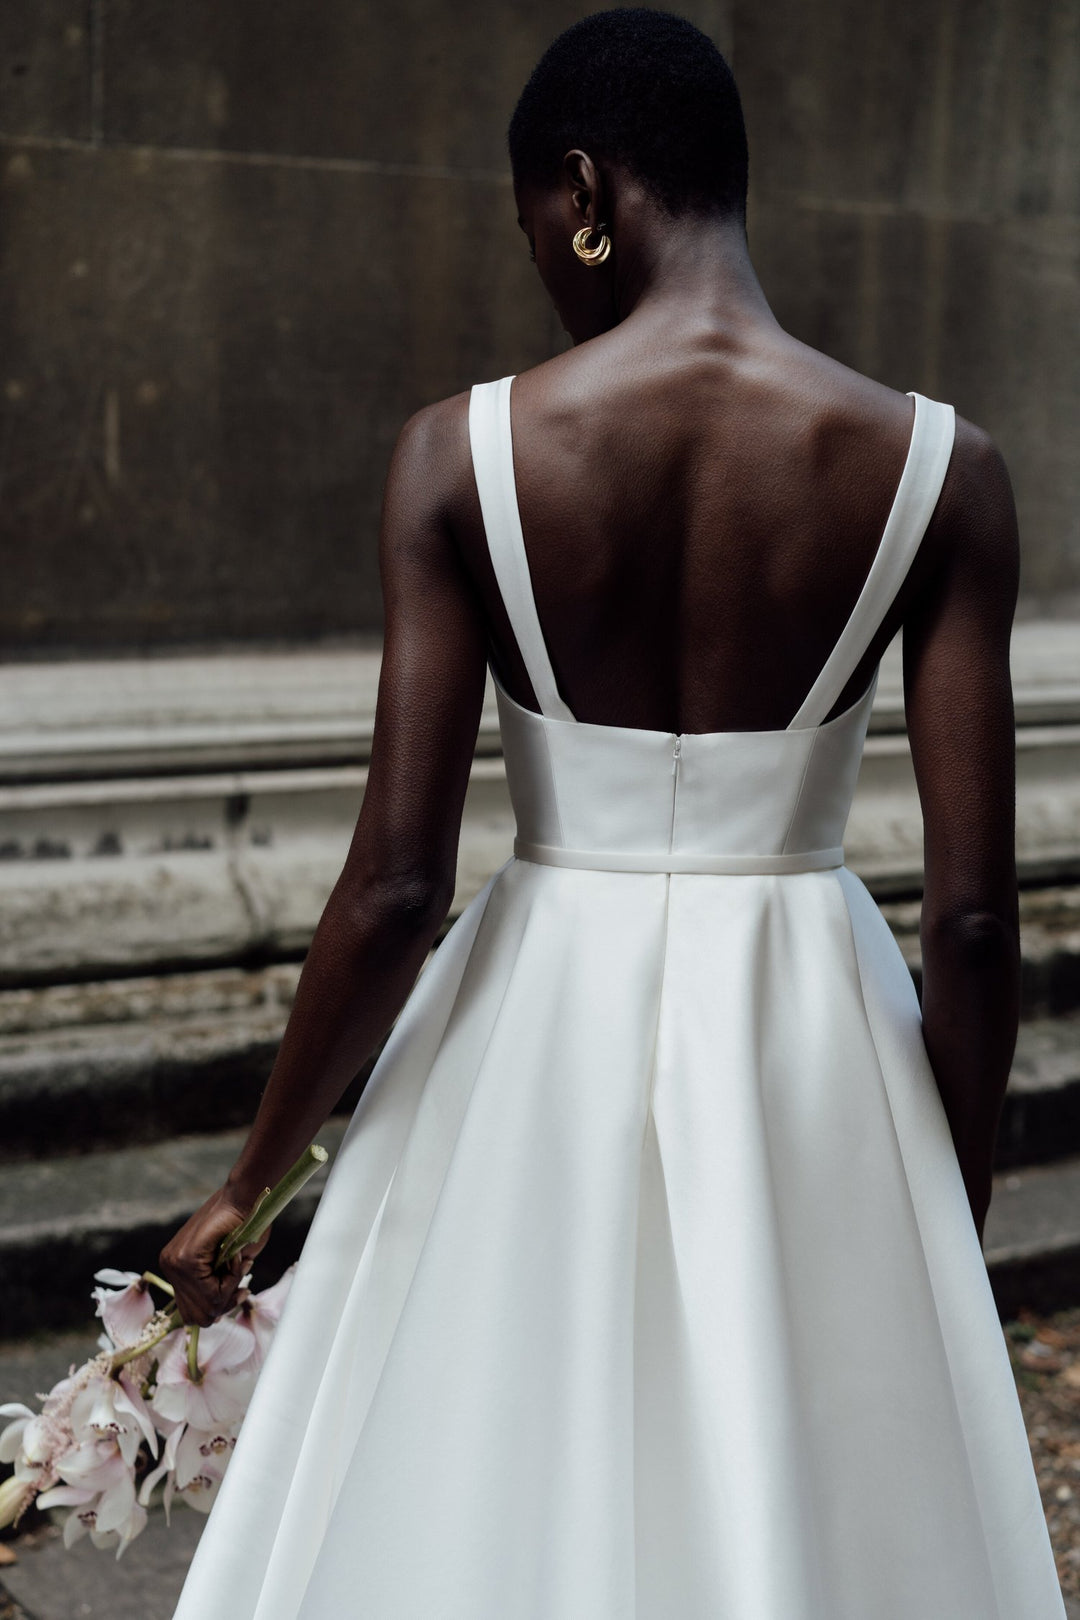 Rent this masterpiece for a timeless yet contemporary bridal look